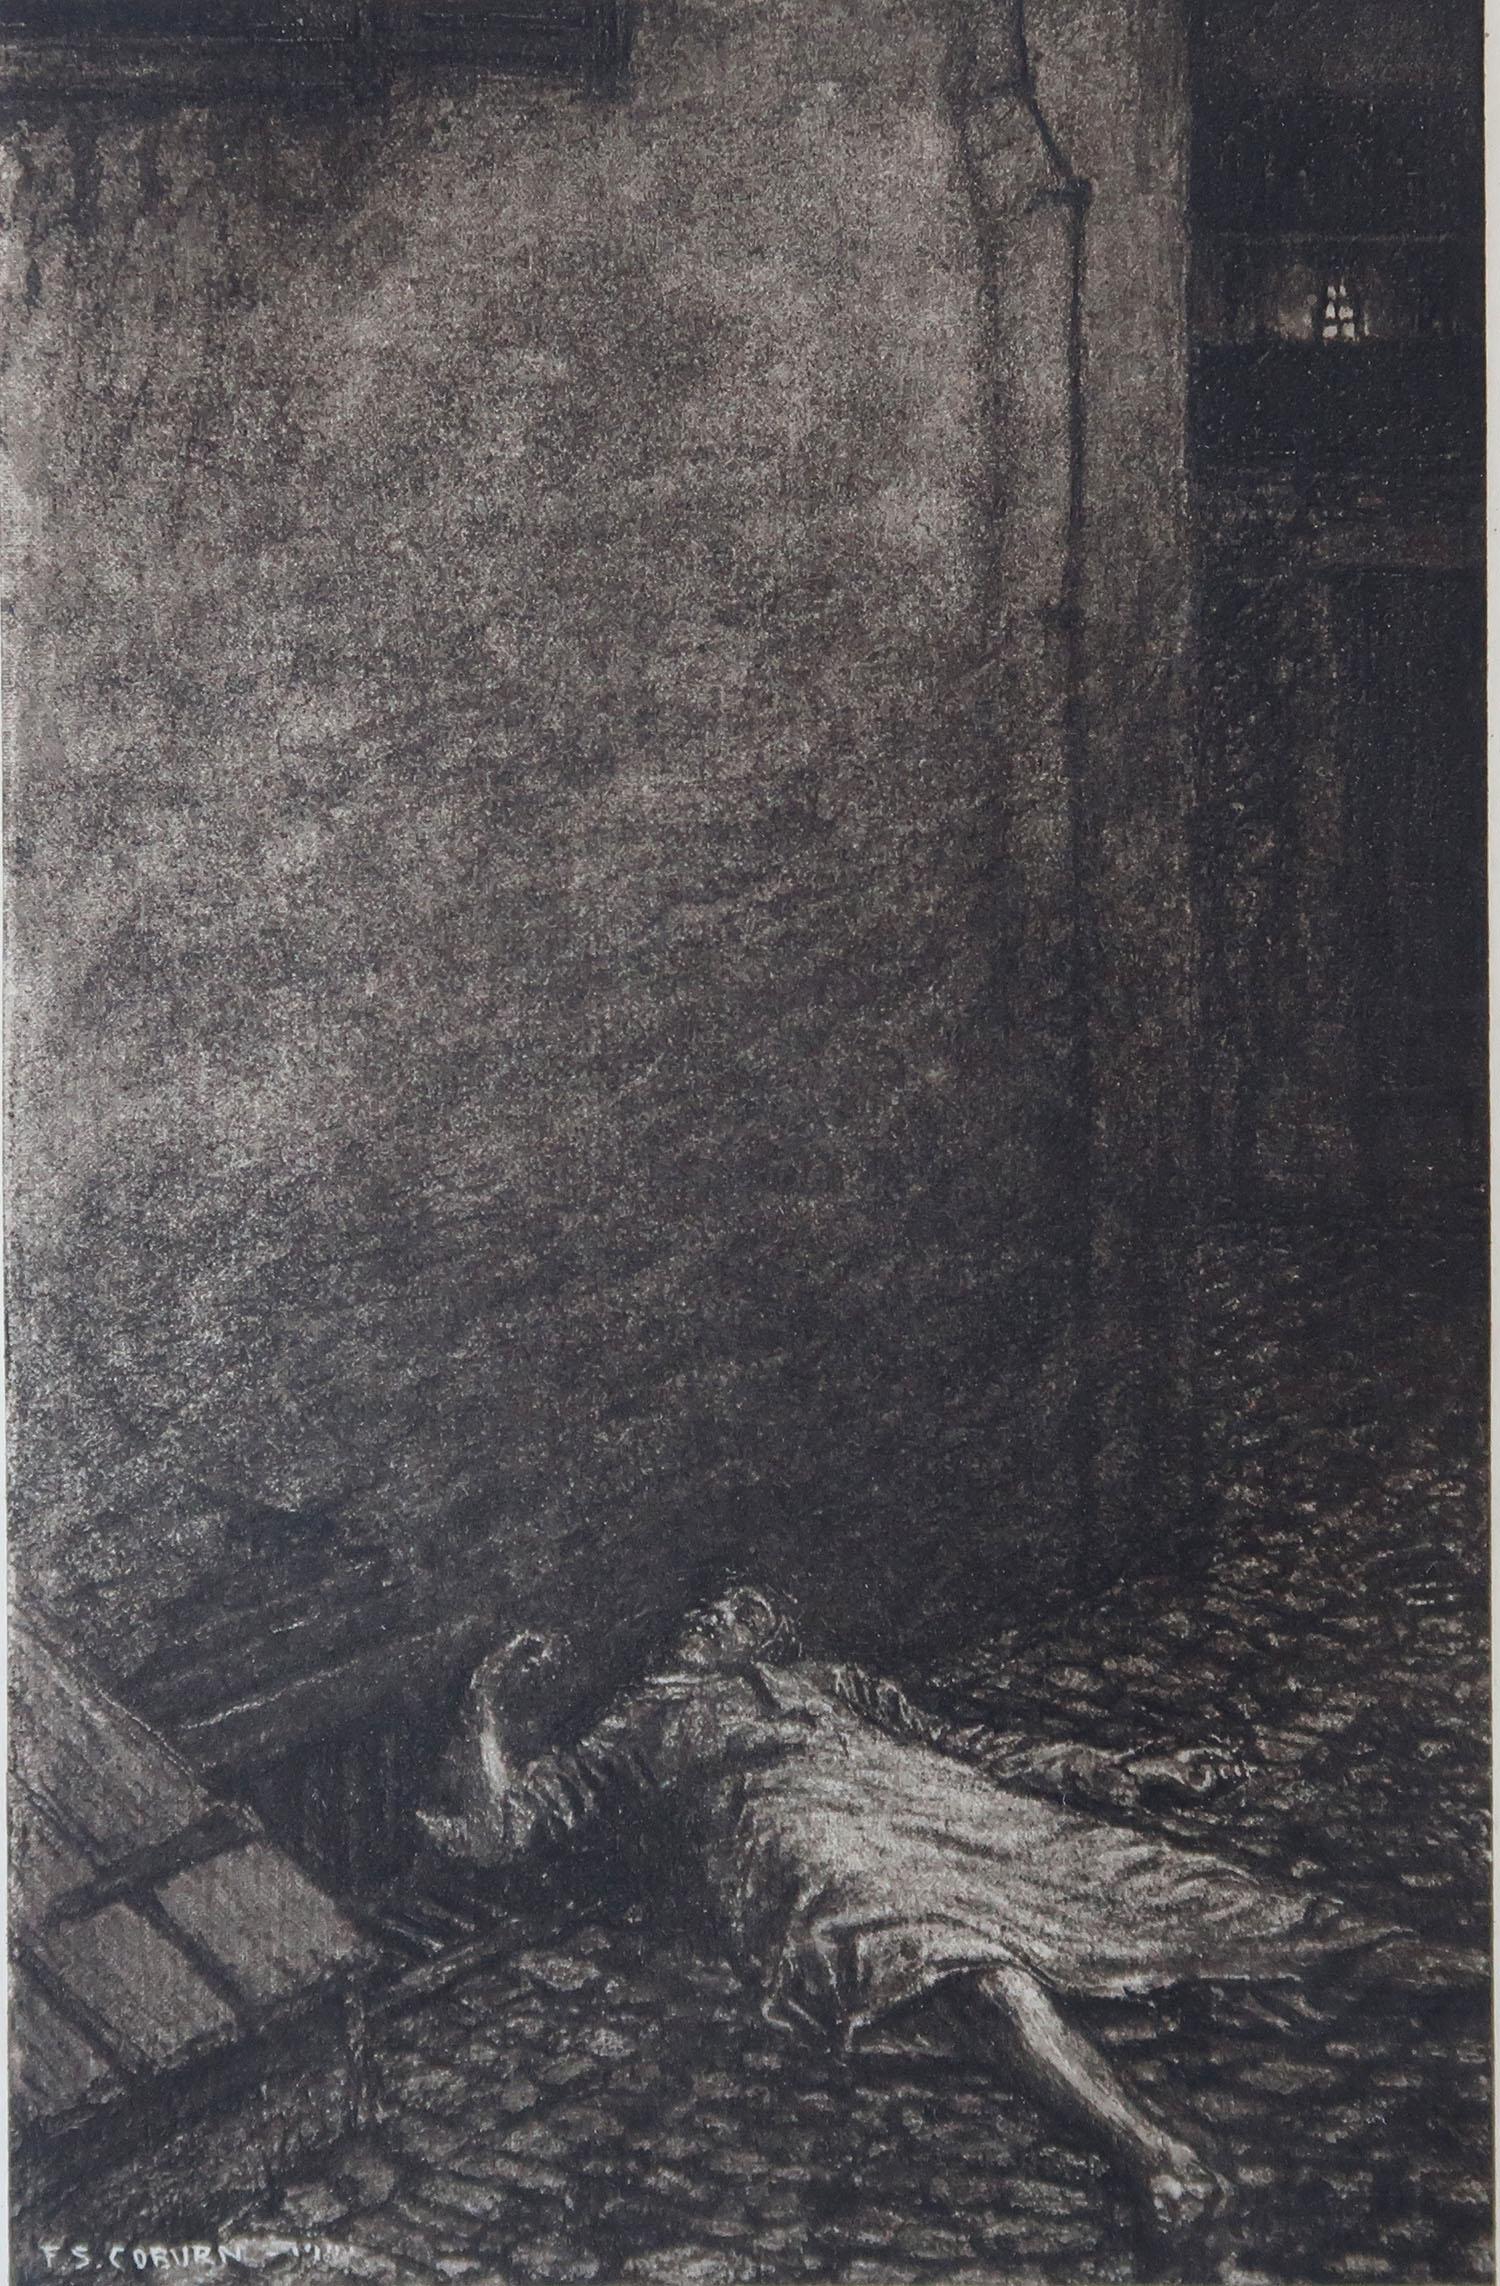 Sensational image by Frederick Simpson Coburn.

In the style of one of my favourite artists, Goya.

Photogravure.

Limited edition of 300. This is No. 84

From The Complete Works of Edgar Allen Poe.

Published by Putnam, New York.